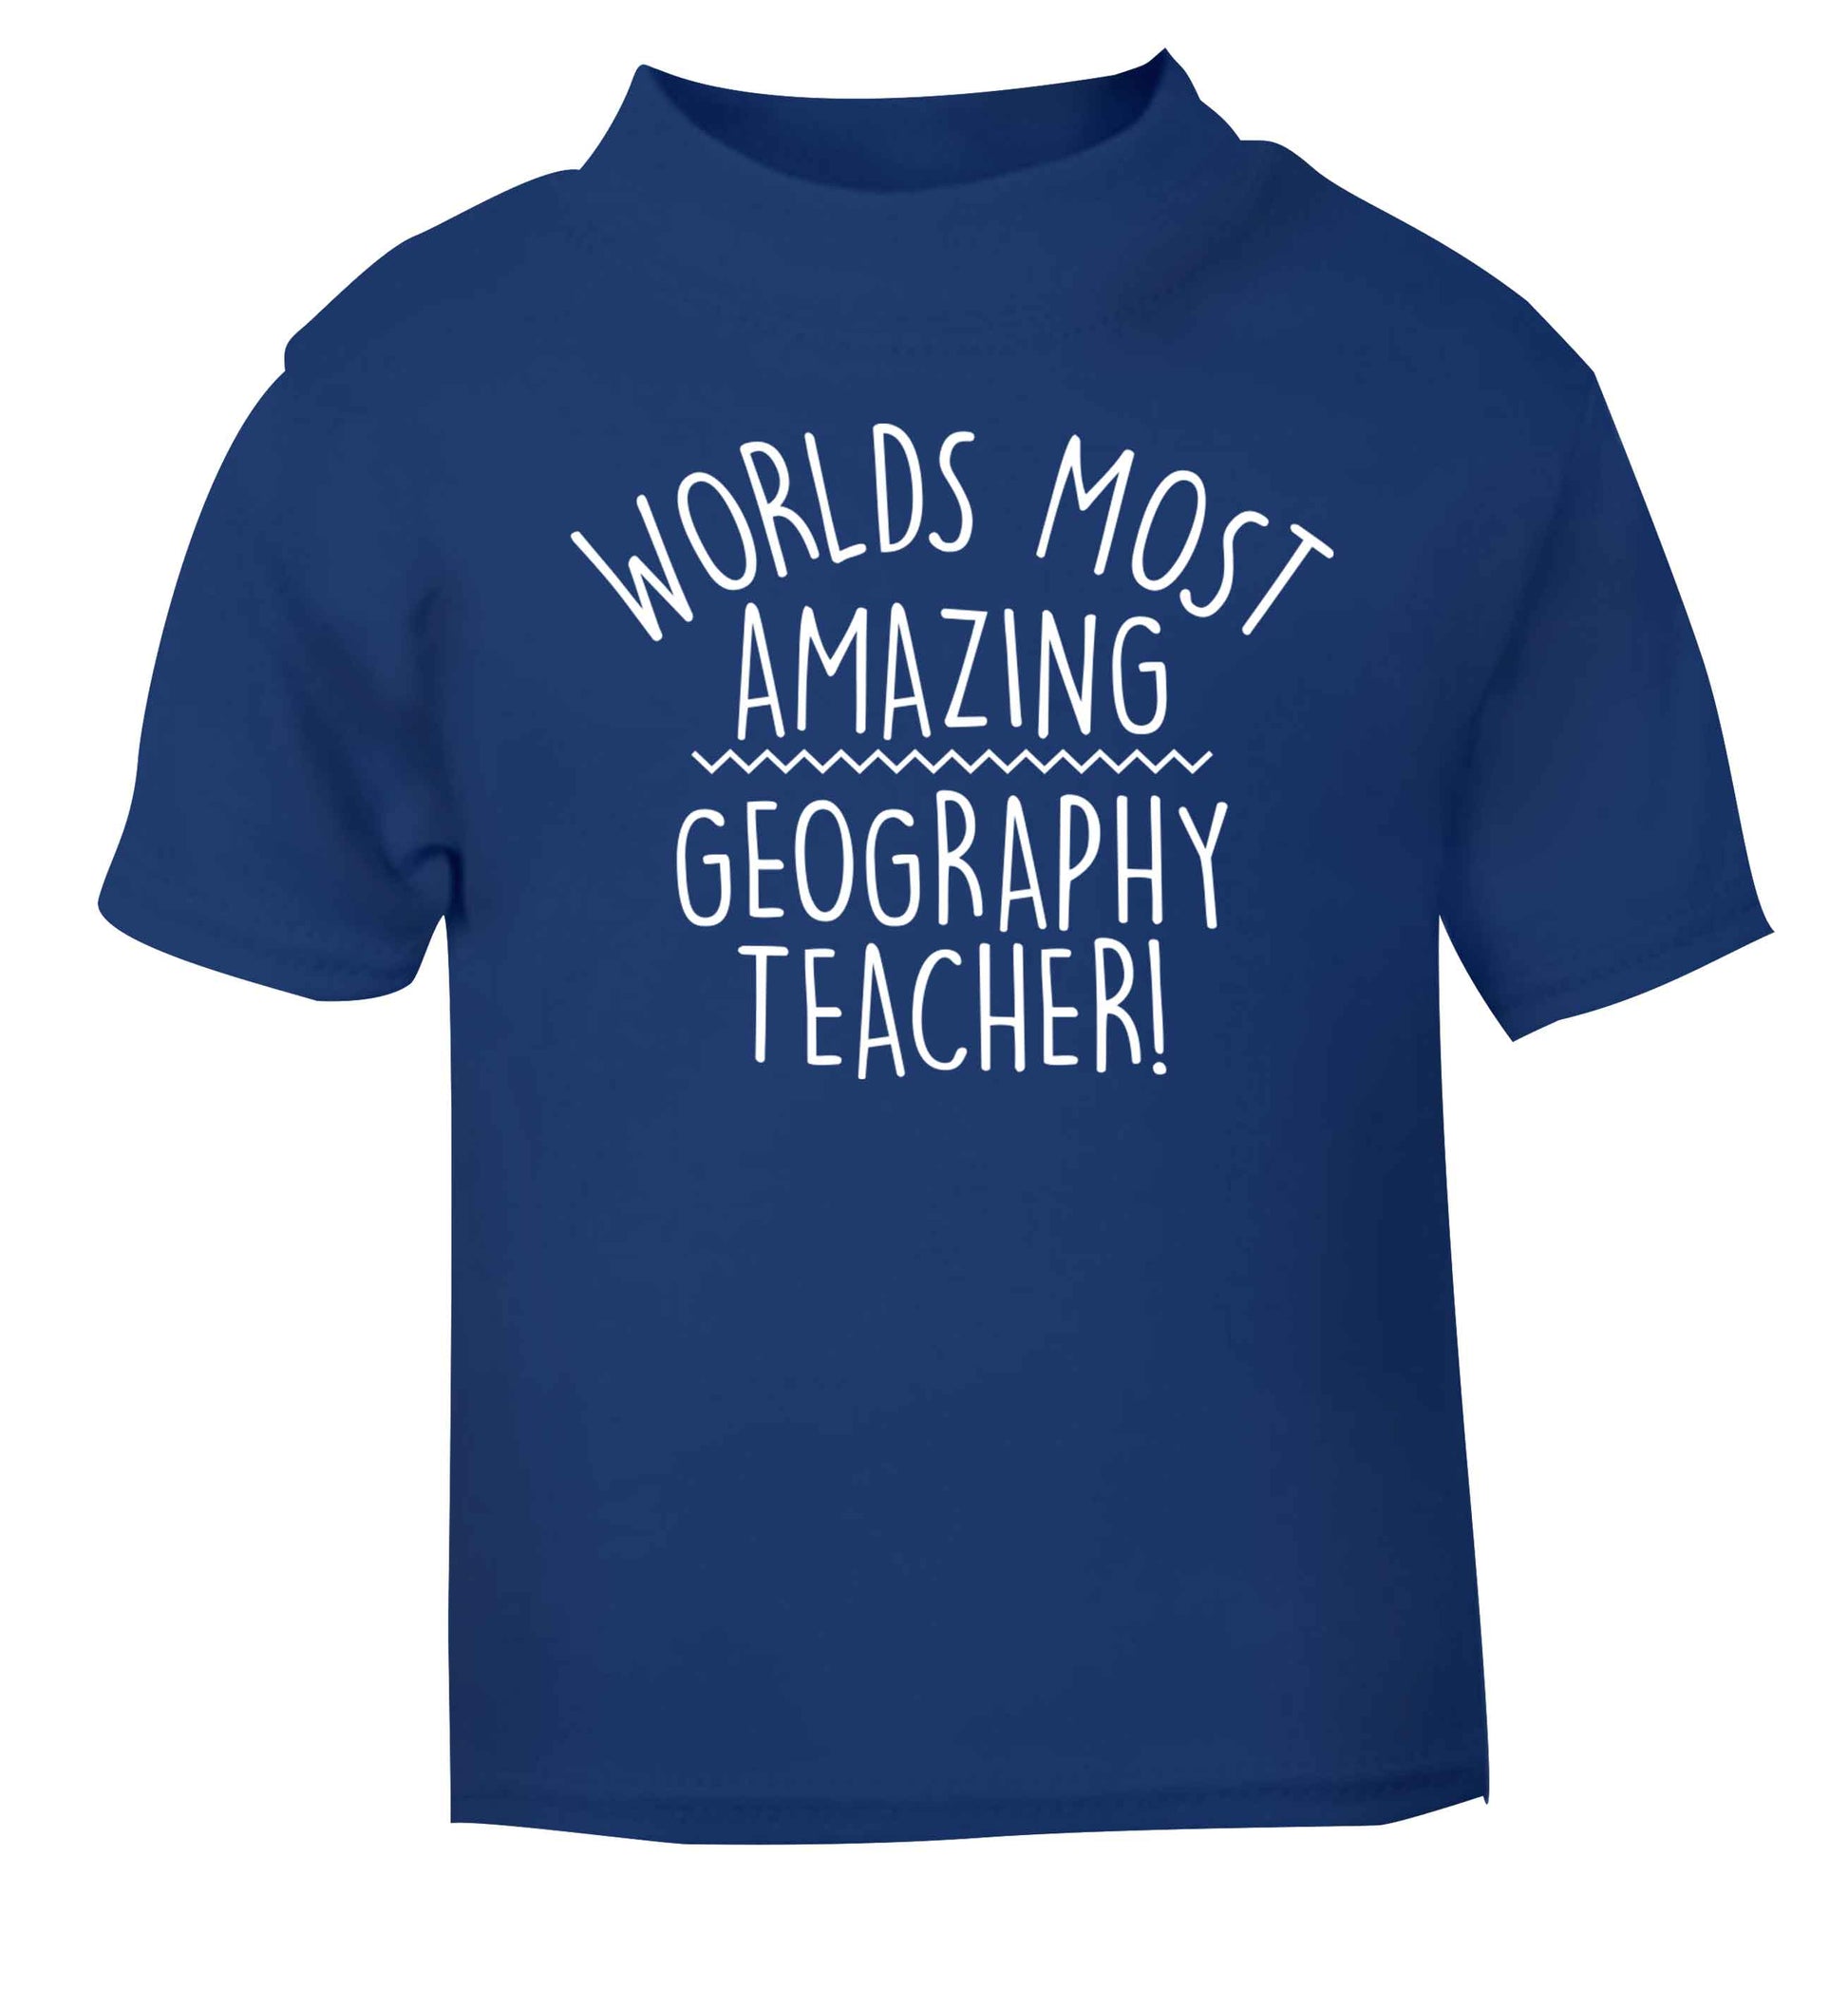 Worlds most amazing geography teacher blue baby toddler Tshirt 2 Years